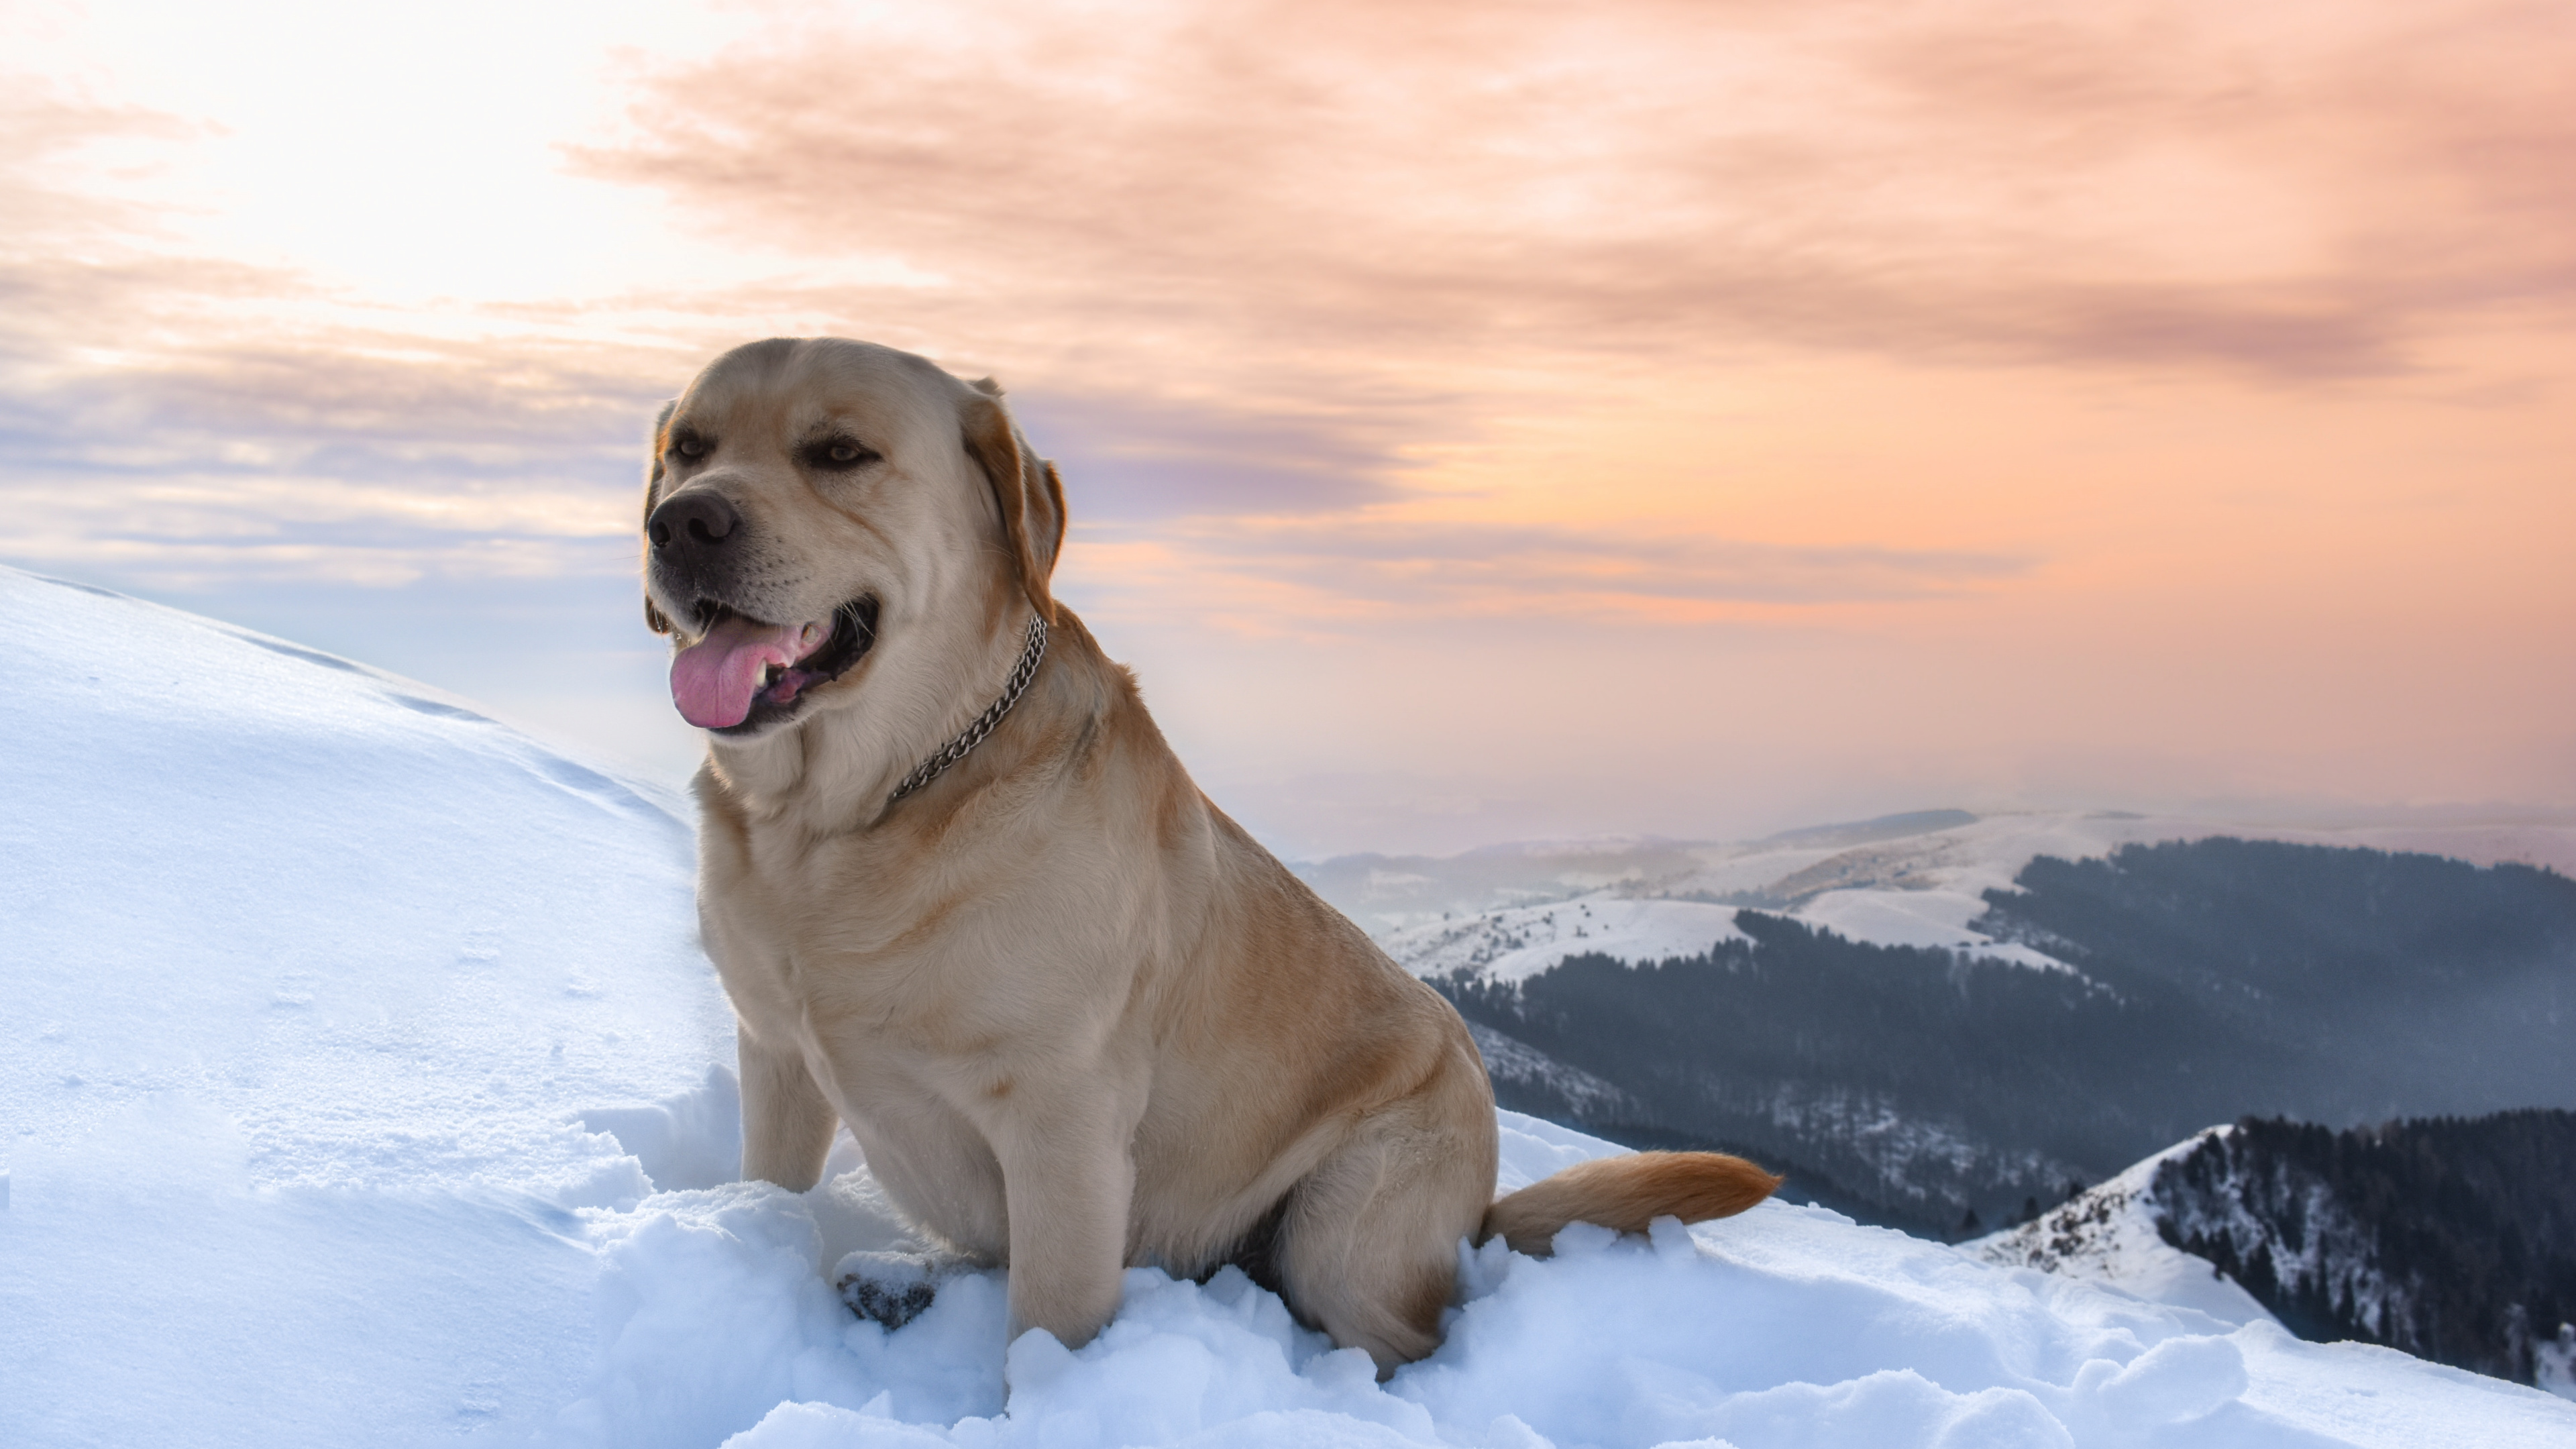 Brown Short Coated Dog on Snow Covered Ground During Daytime. Wallpaper in 3840x2160 Resolution